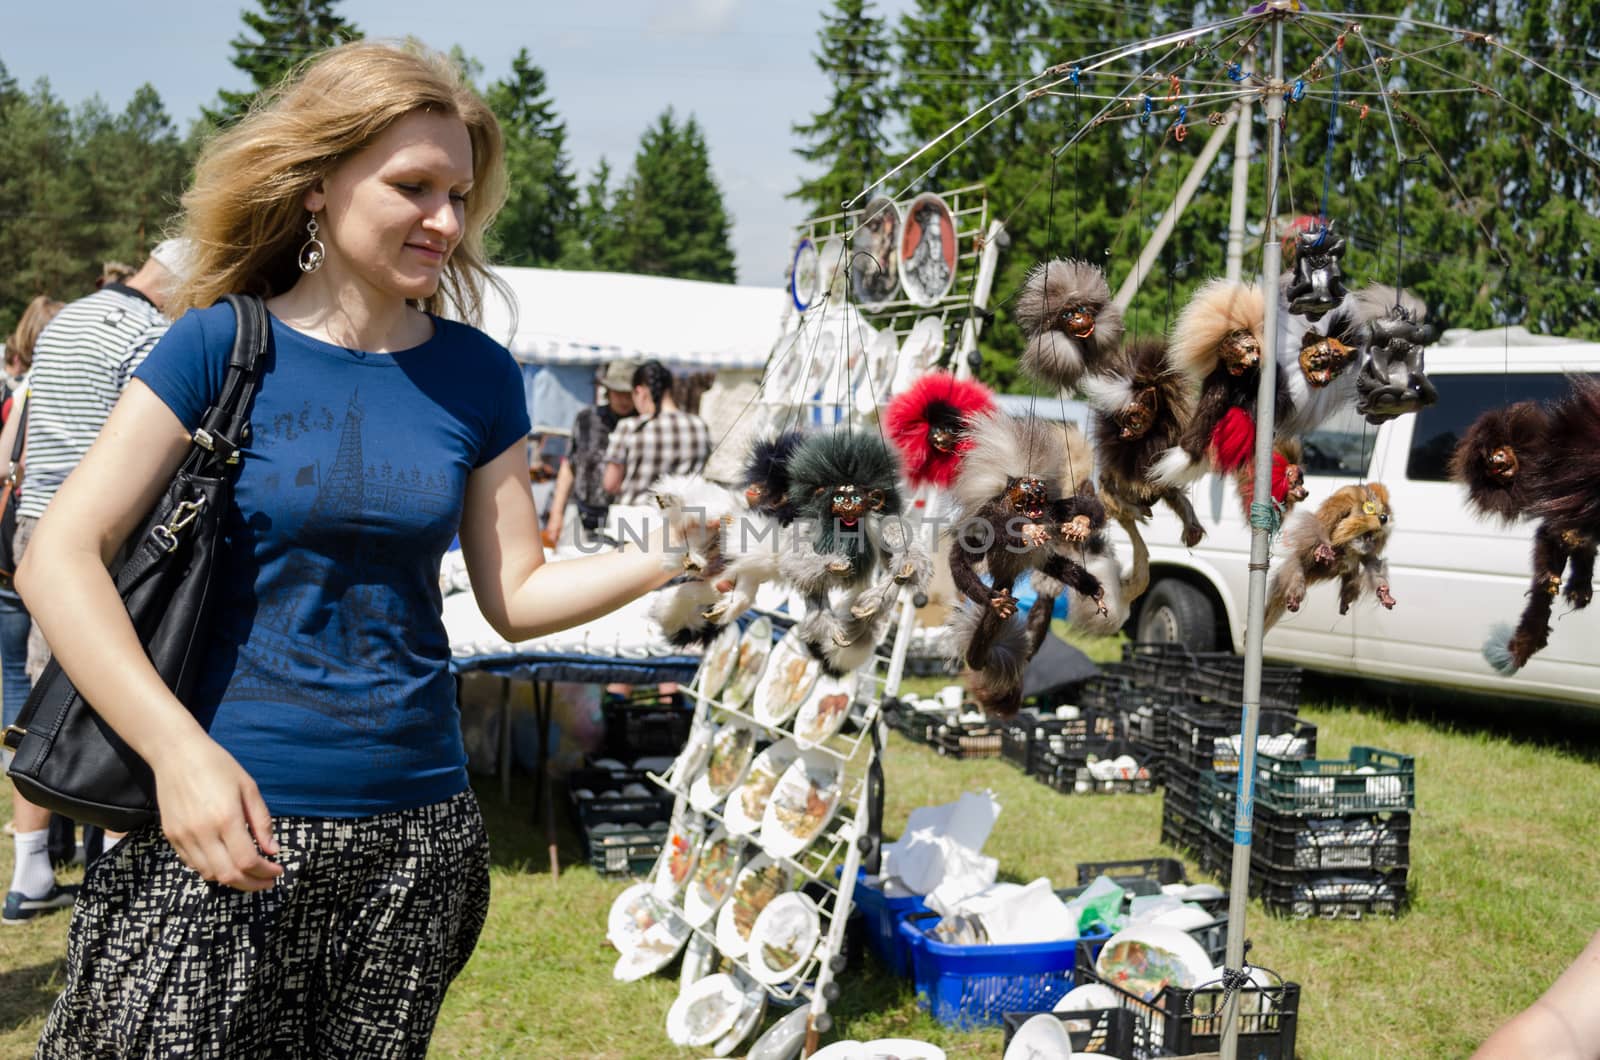 ANYKSCIAI, LITHUANIA - JUNE 01 : young blonde woman browse fair handmade wares on June 01, 2013 in Anyksciai.